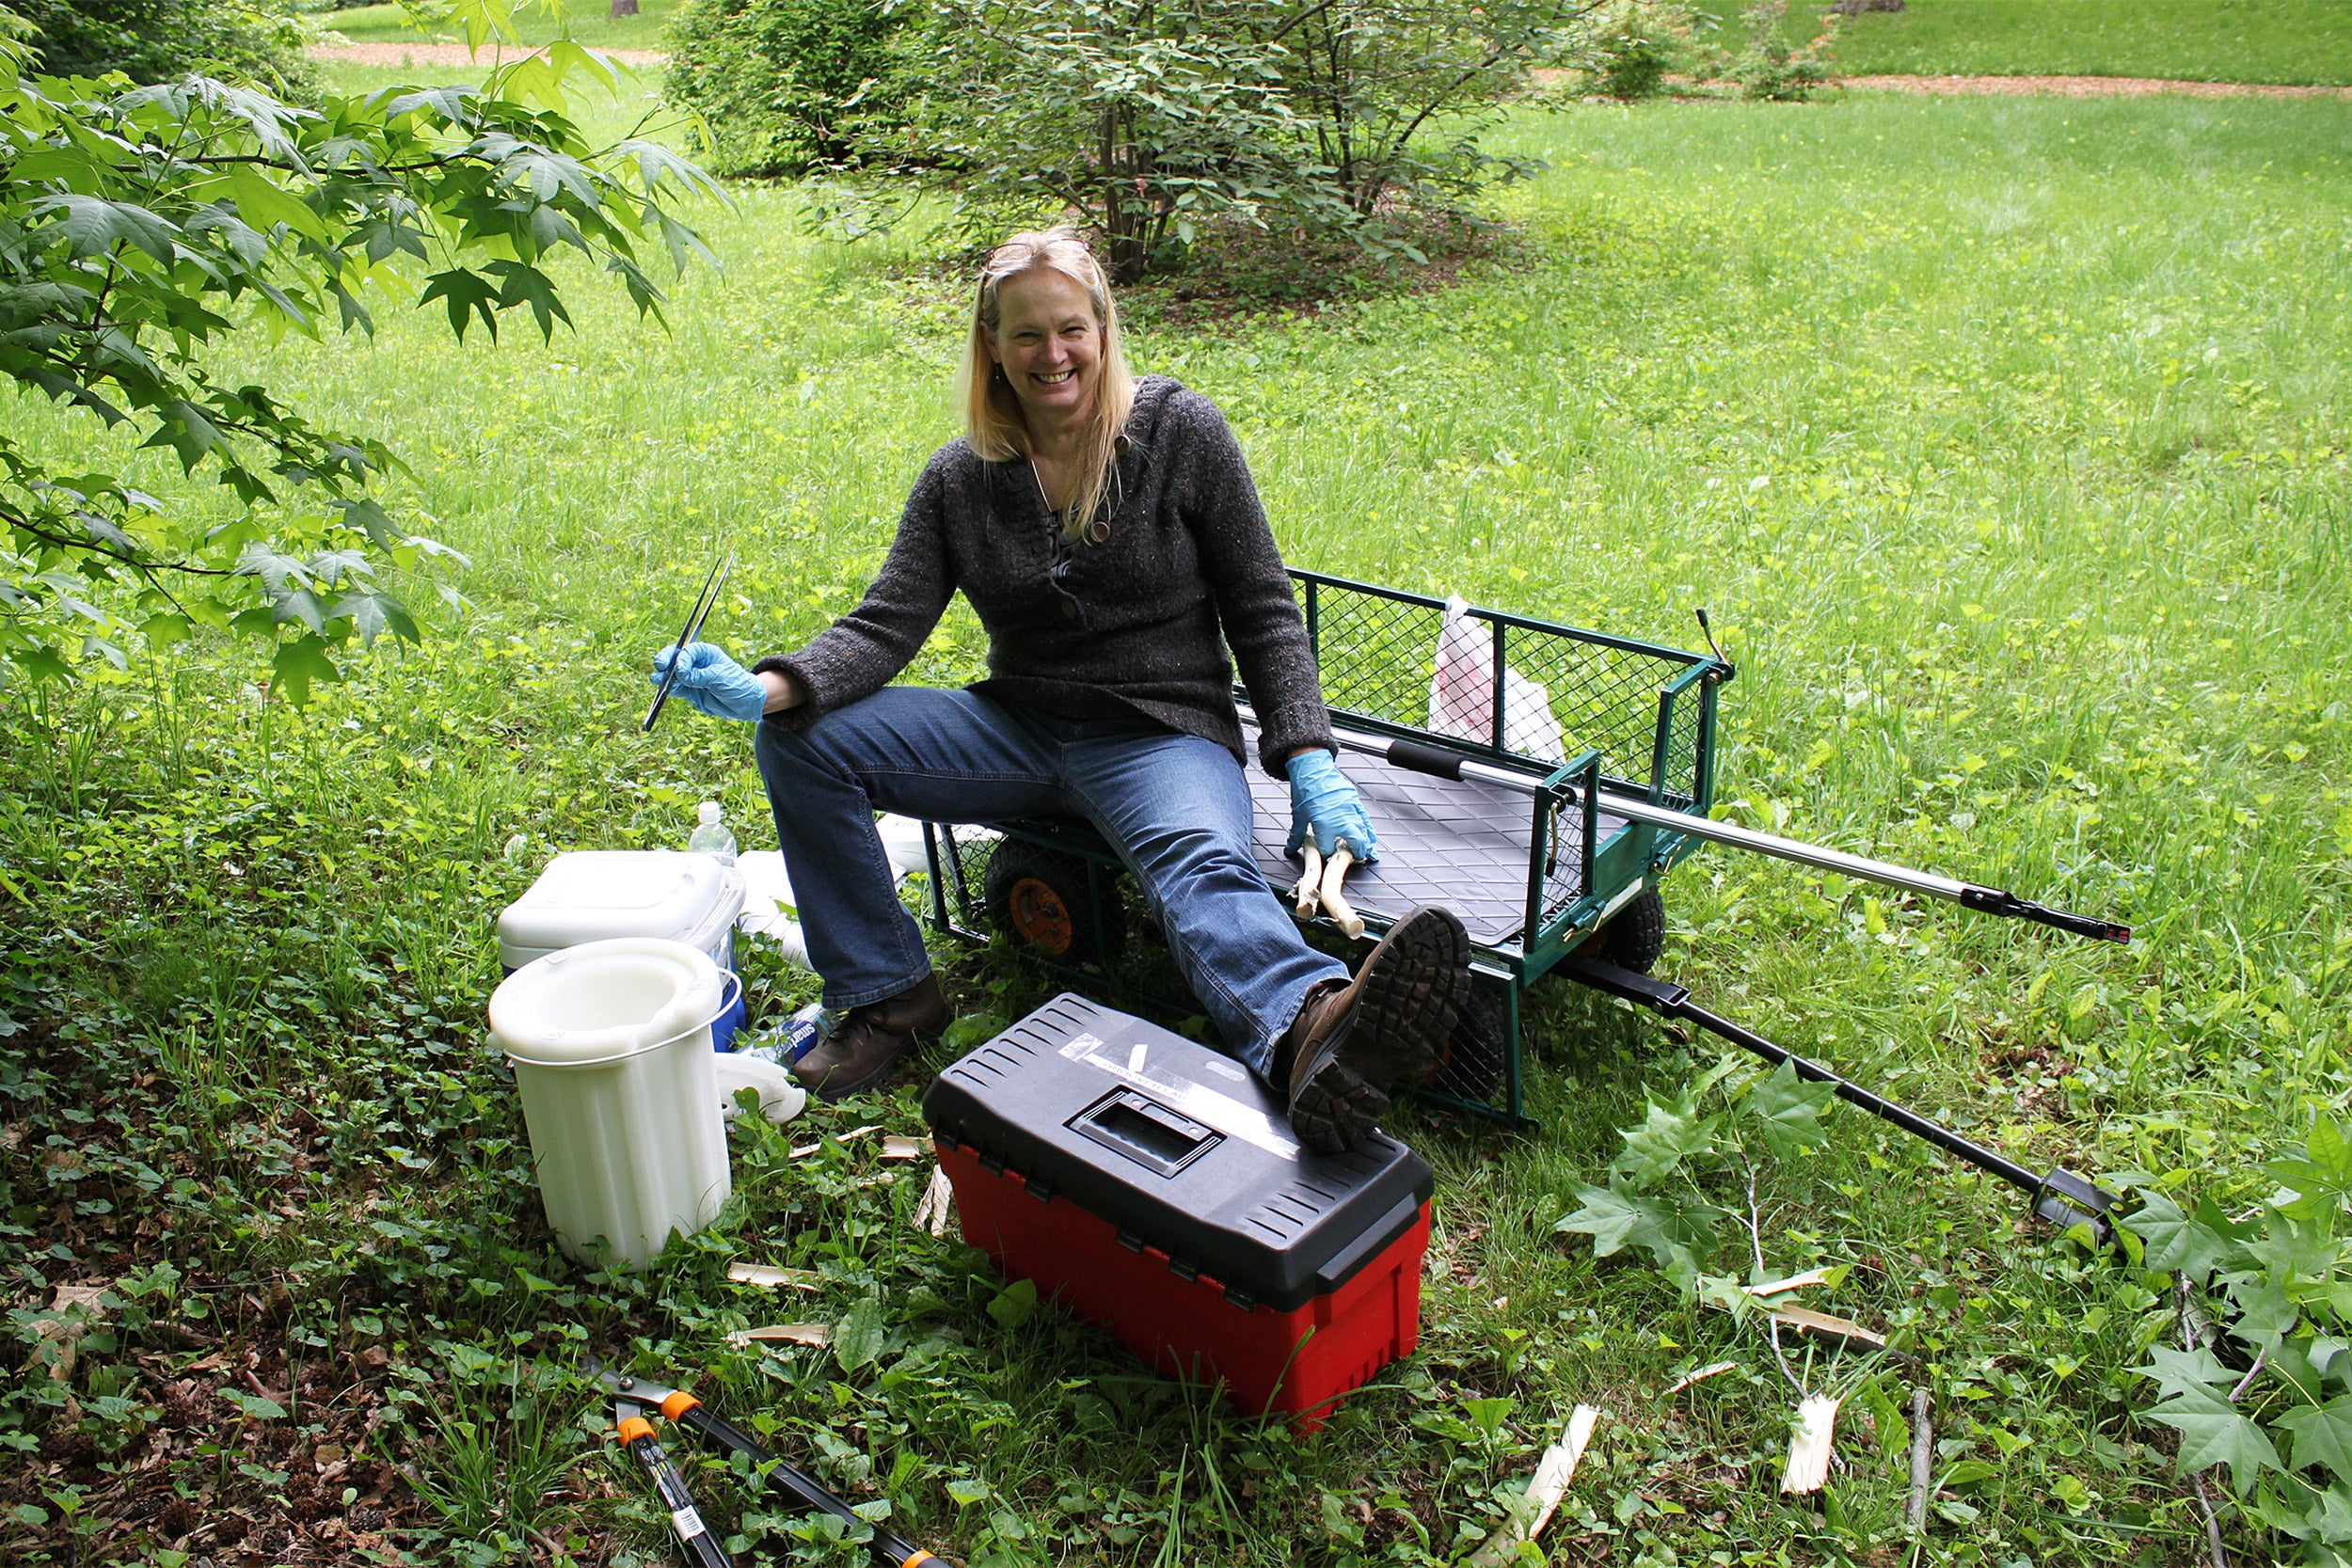 Sue-Arnold: Suzanne Gerttula, research assistant with Andrew Groover, sits on a transport cart with equipment including pole pruners and liquid nitrogen to study a sweetgum (Liquidambar styraciflua) tree. Photo by Andrew Groover